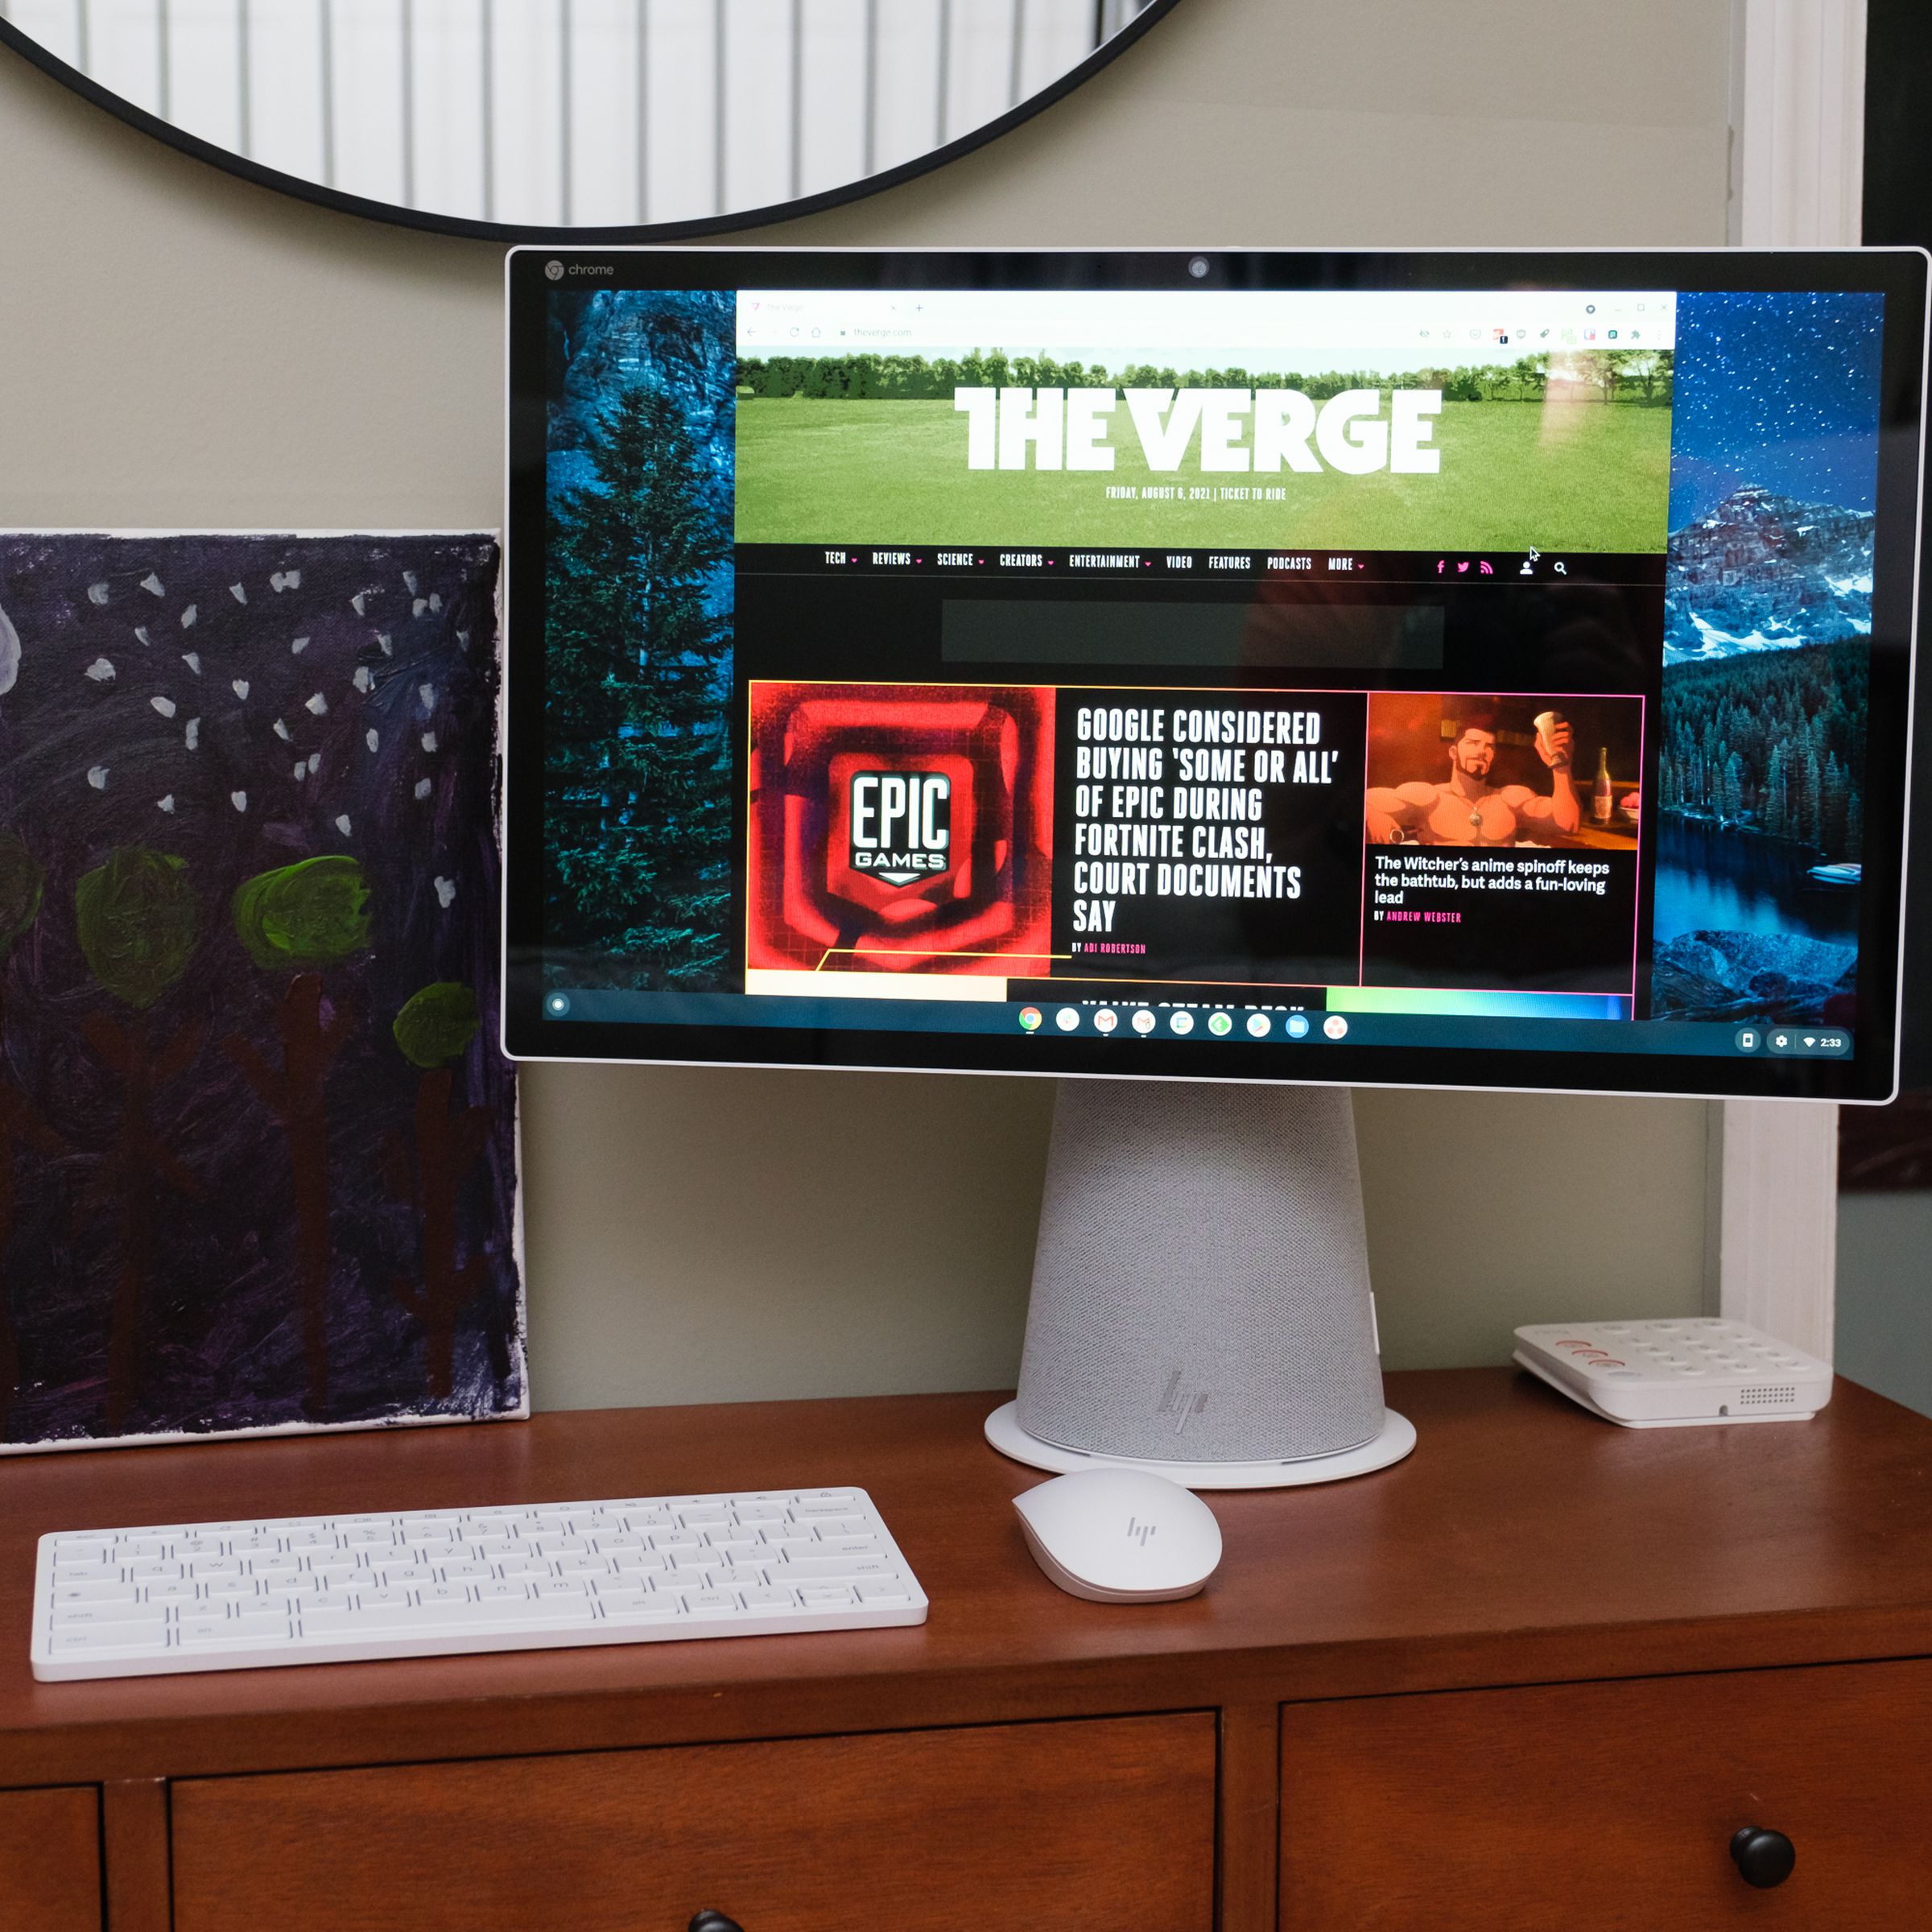 The HP Chromebase AiO all-in-one computer.